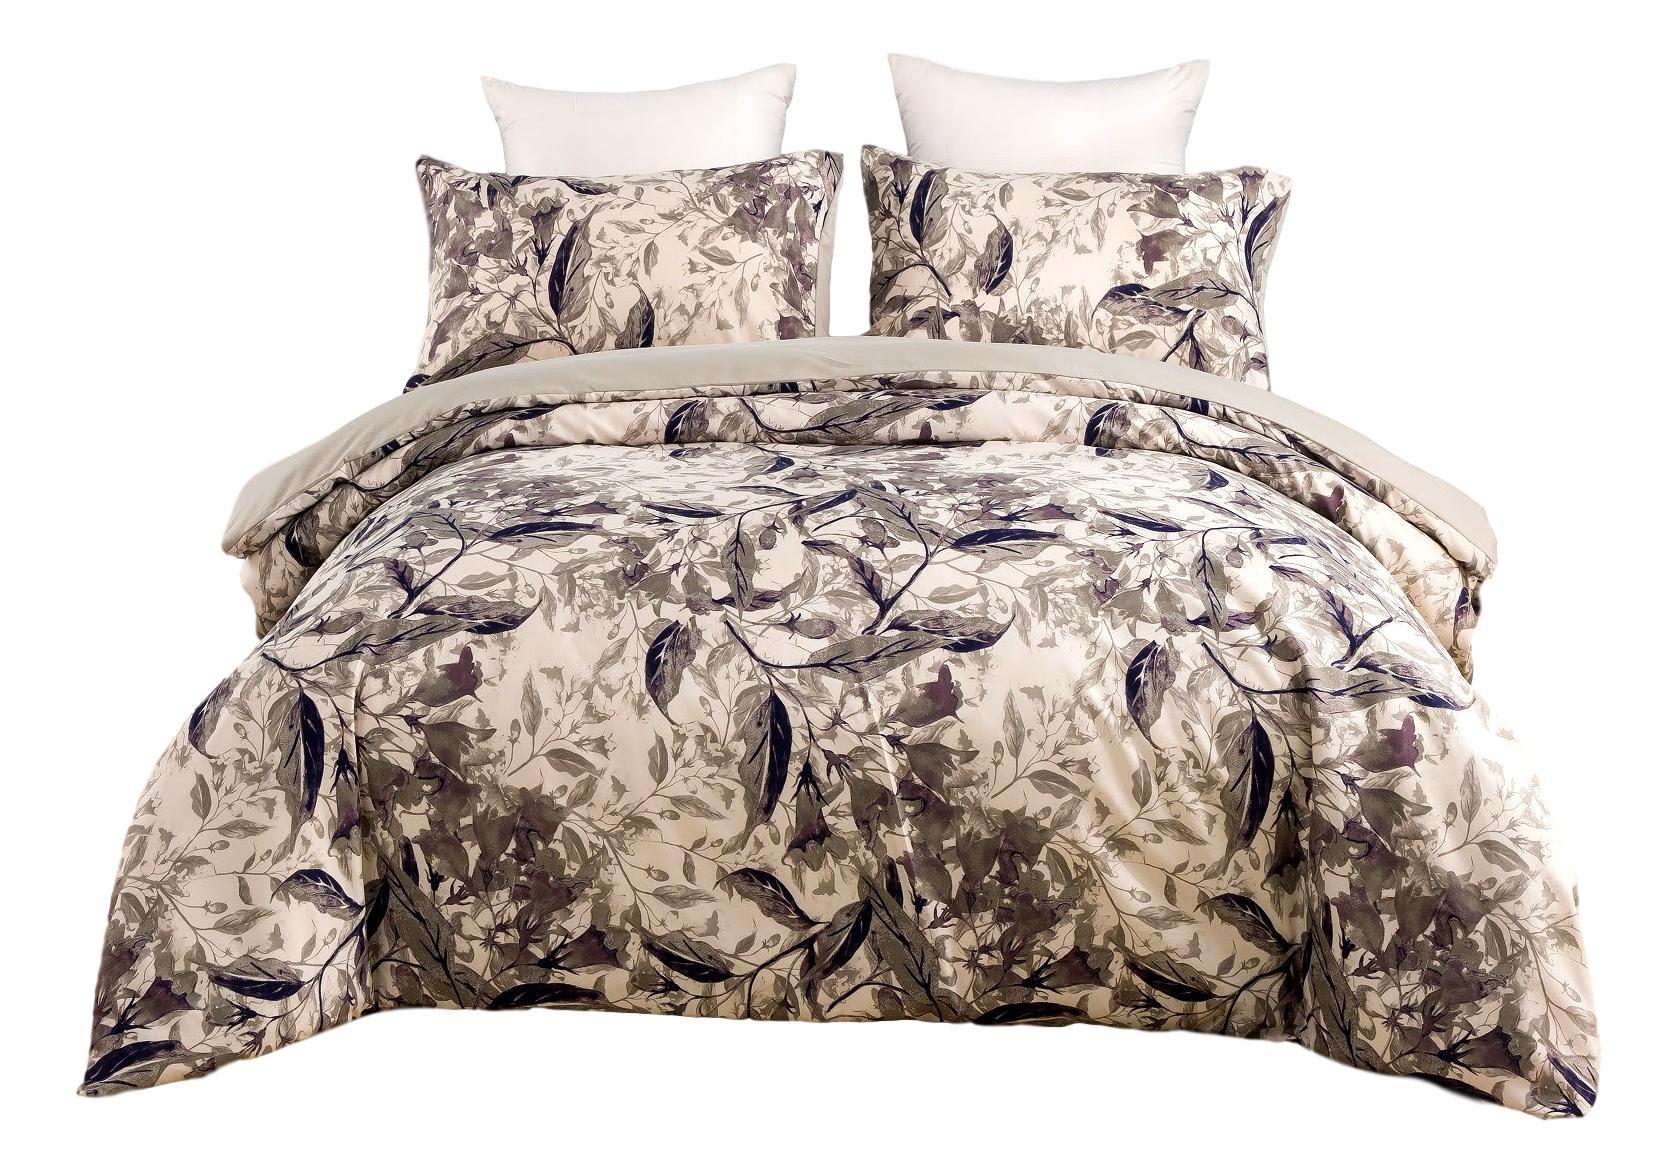 Tache Microfiber Abstract Wispy Leaf Taupe Grey Duvet Cover (JHW-843) - Tache Home Fashion